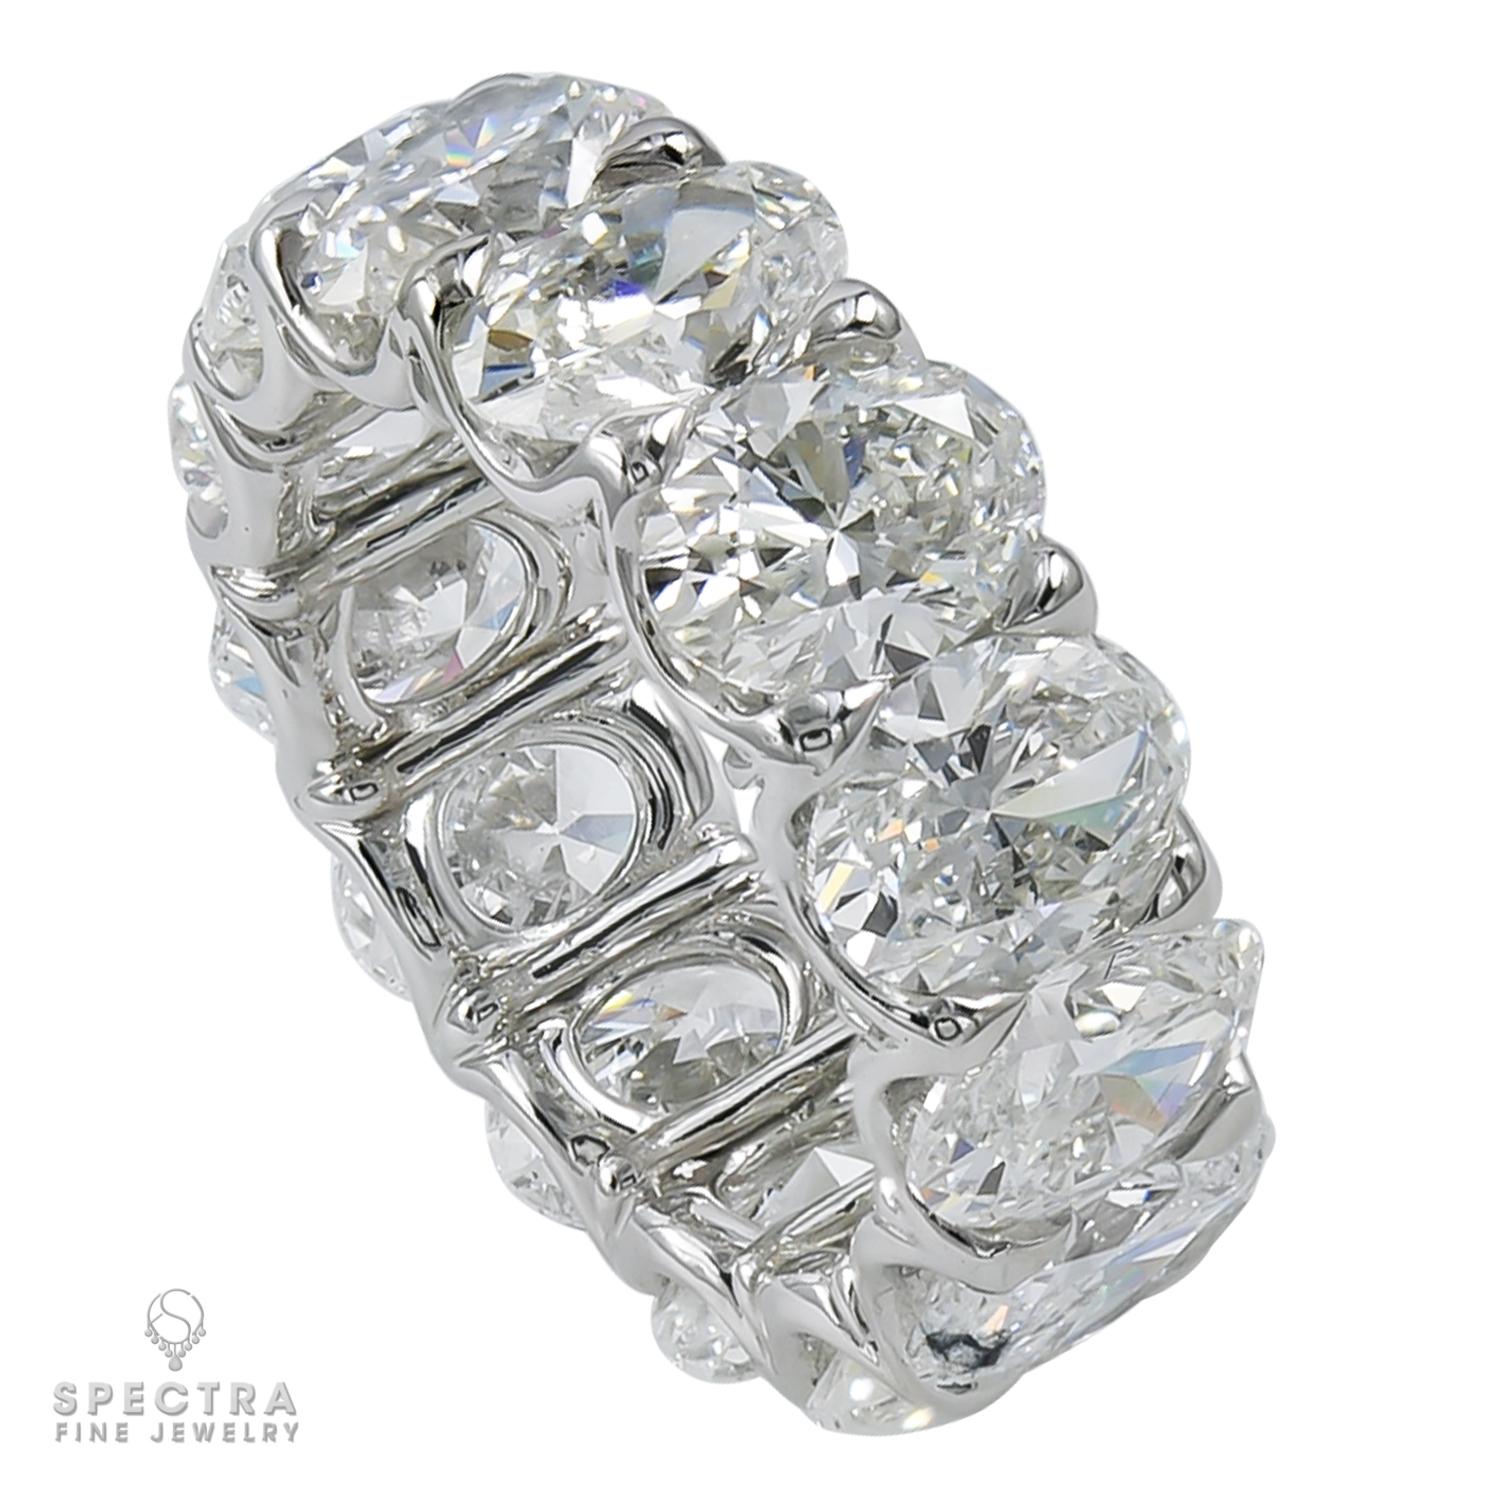 A classy eternity/wedding band ring comprising of 13 oval diamonds weighing a total of 11.73 carats. Each diamond is 0.9 carat.
The diamonds are certified by GIA stating that they are with D-E-F color, VVS-VS clarity.
Metal is 18k white gold, gross